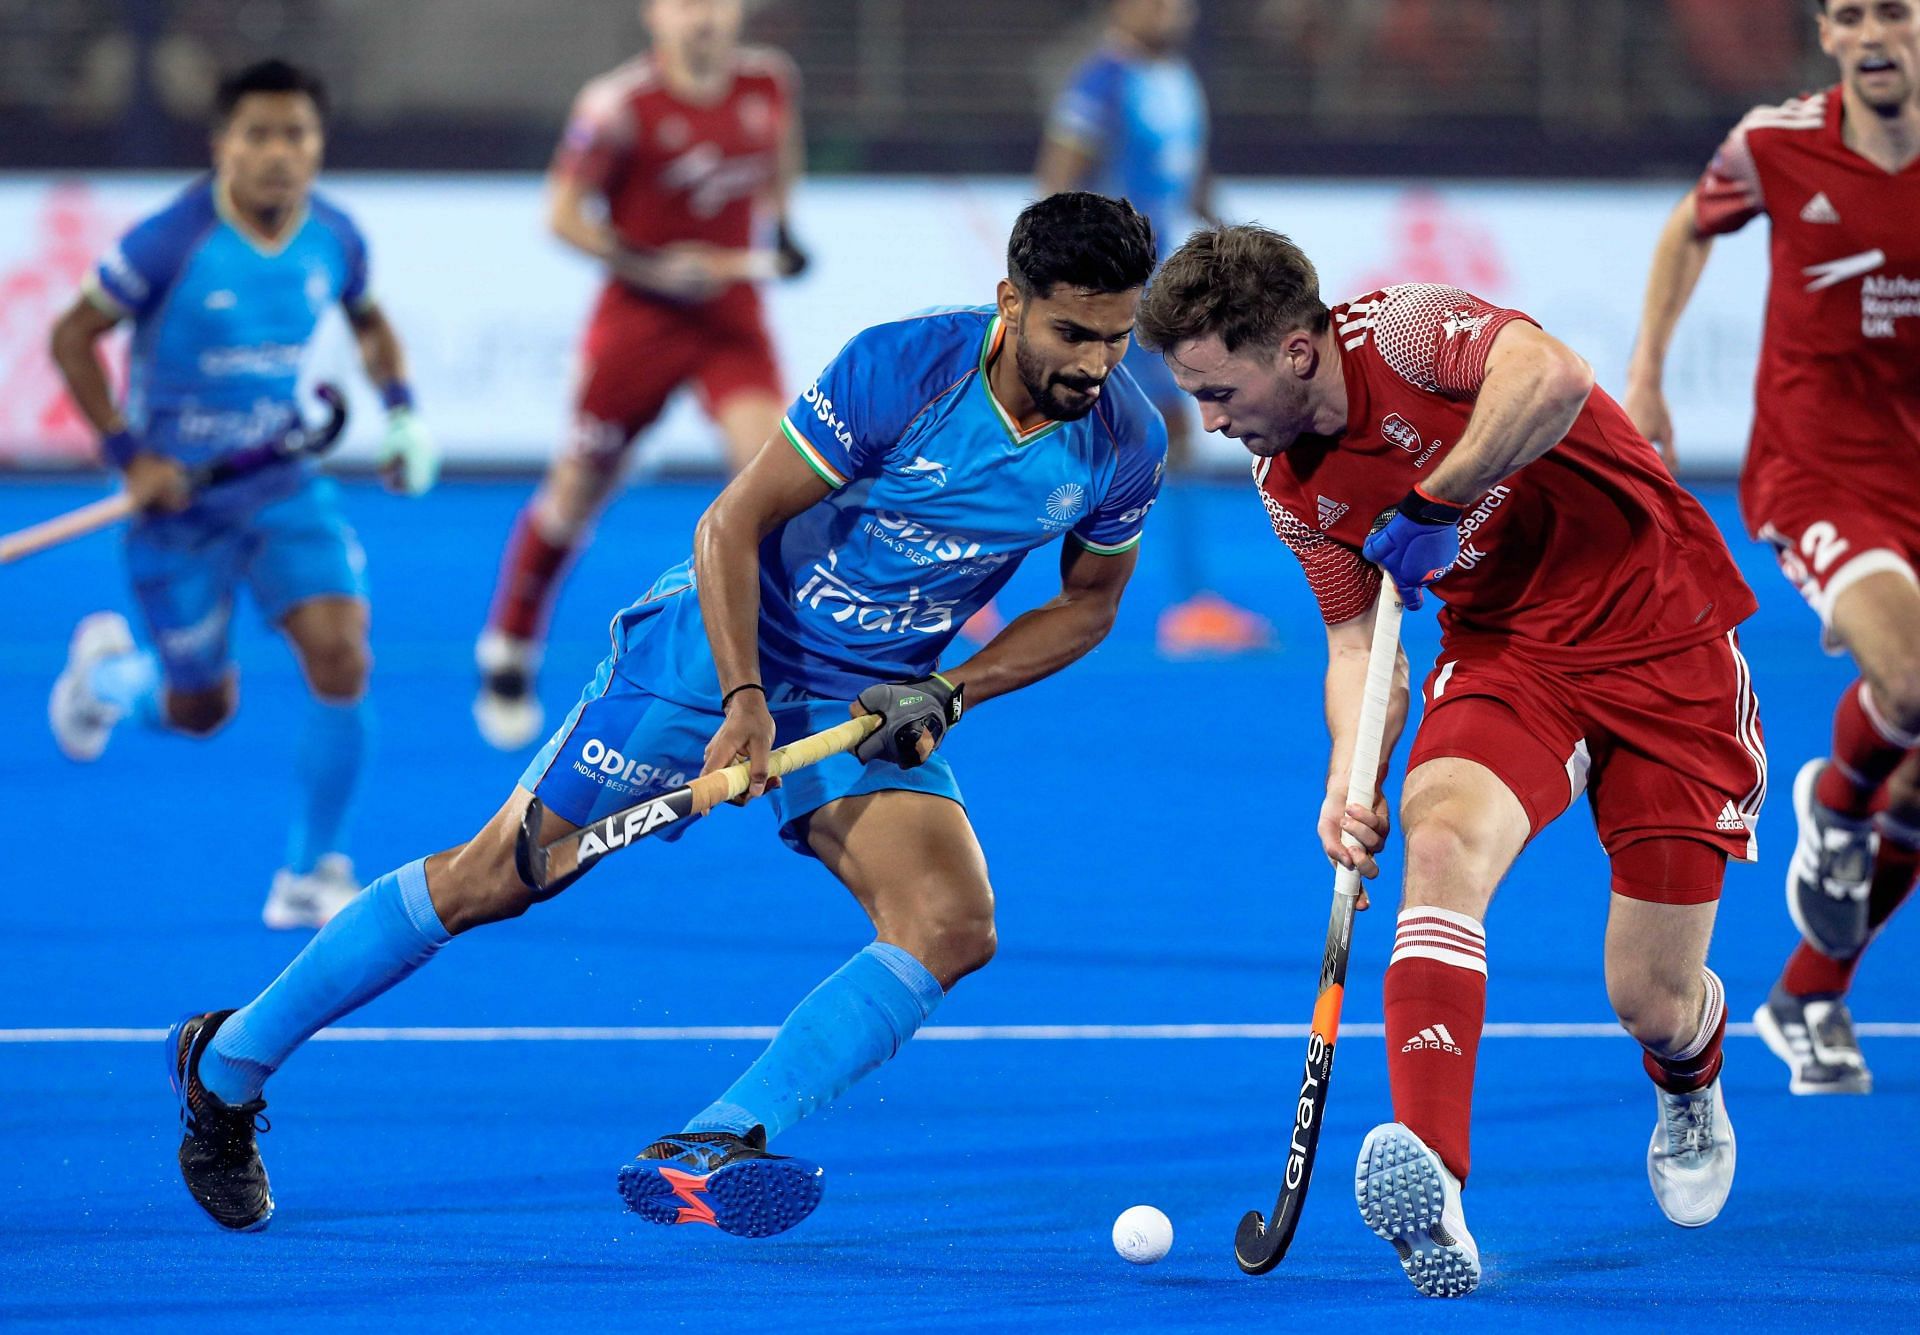 England and India played out a goalless humdinger